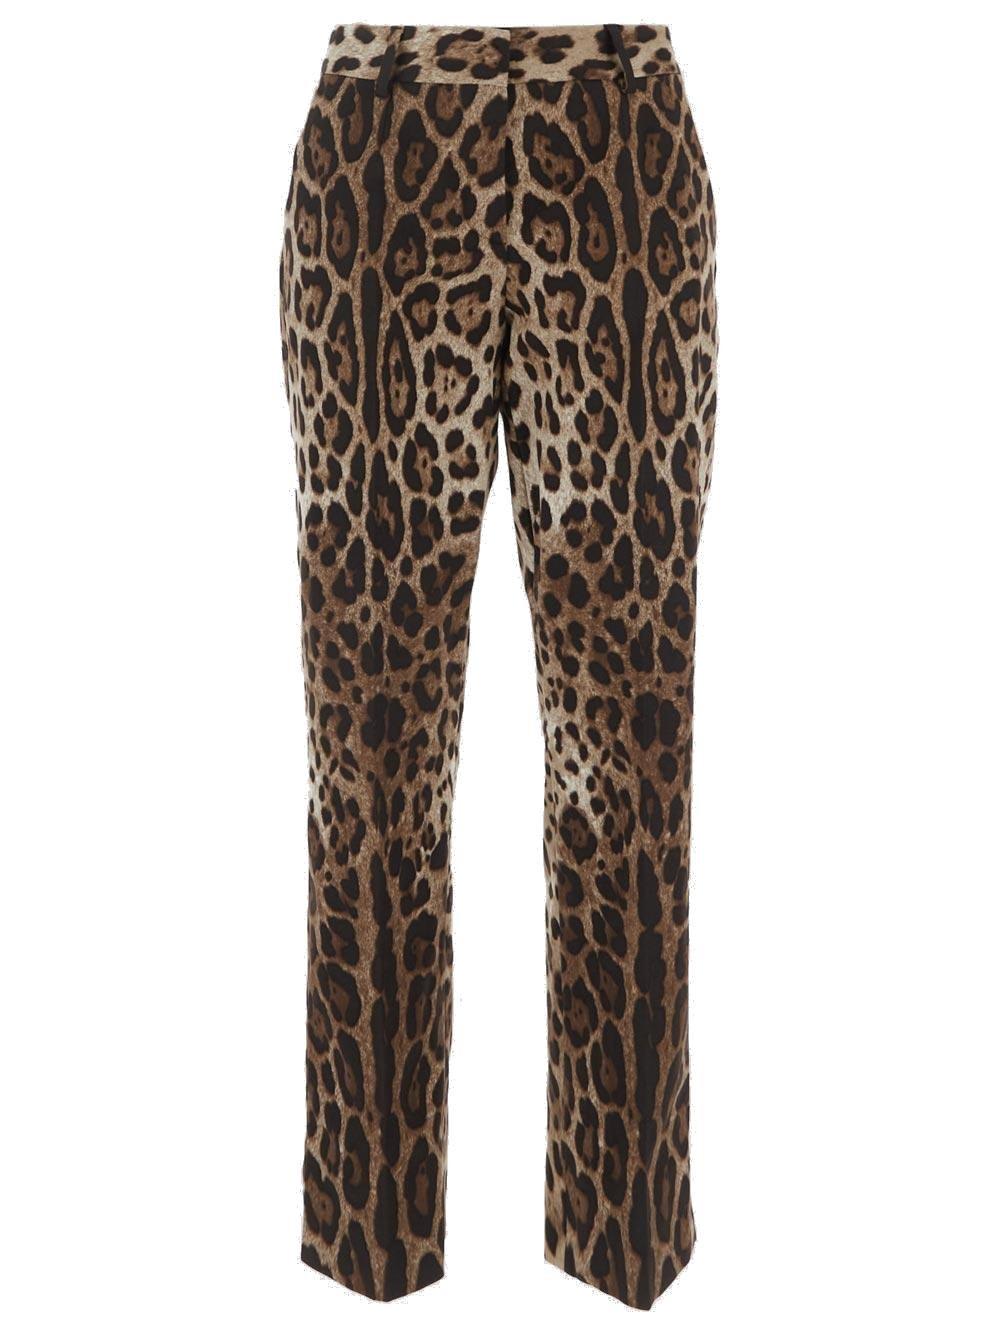 DOLCE & GABBANA LEOPARD-PRINTED HIGH-WAIST CROPPED TROUSERS